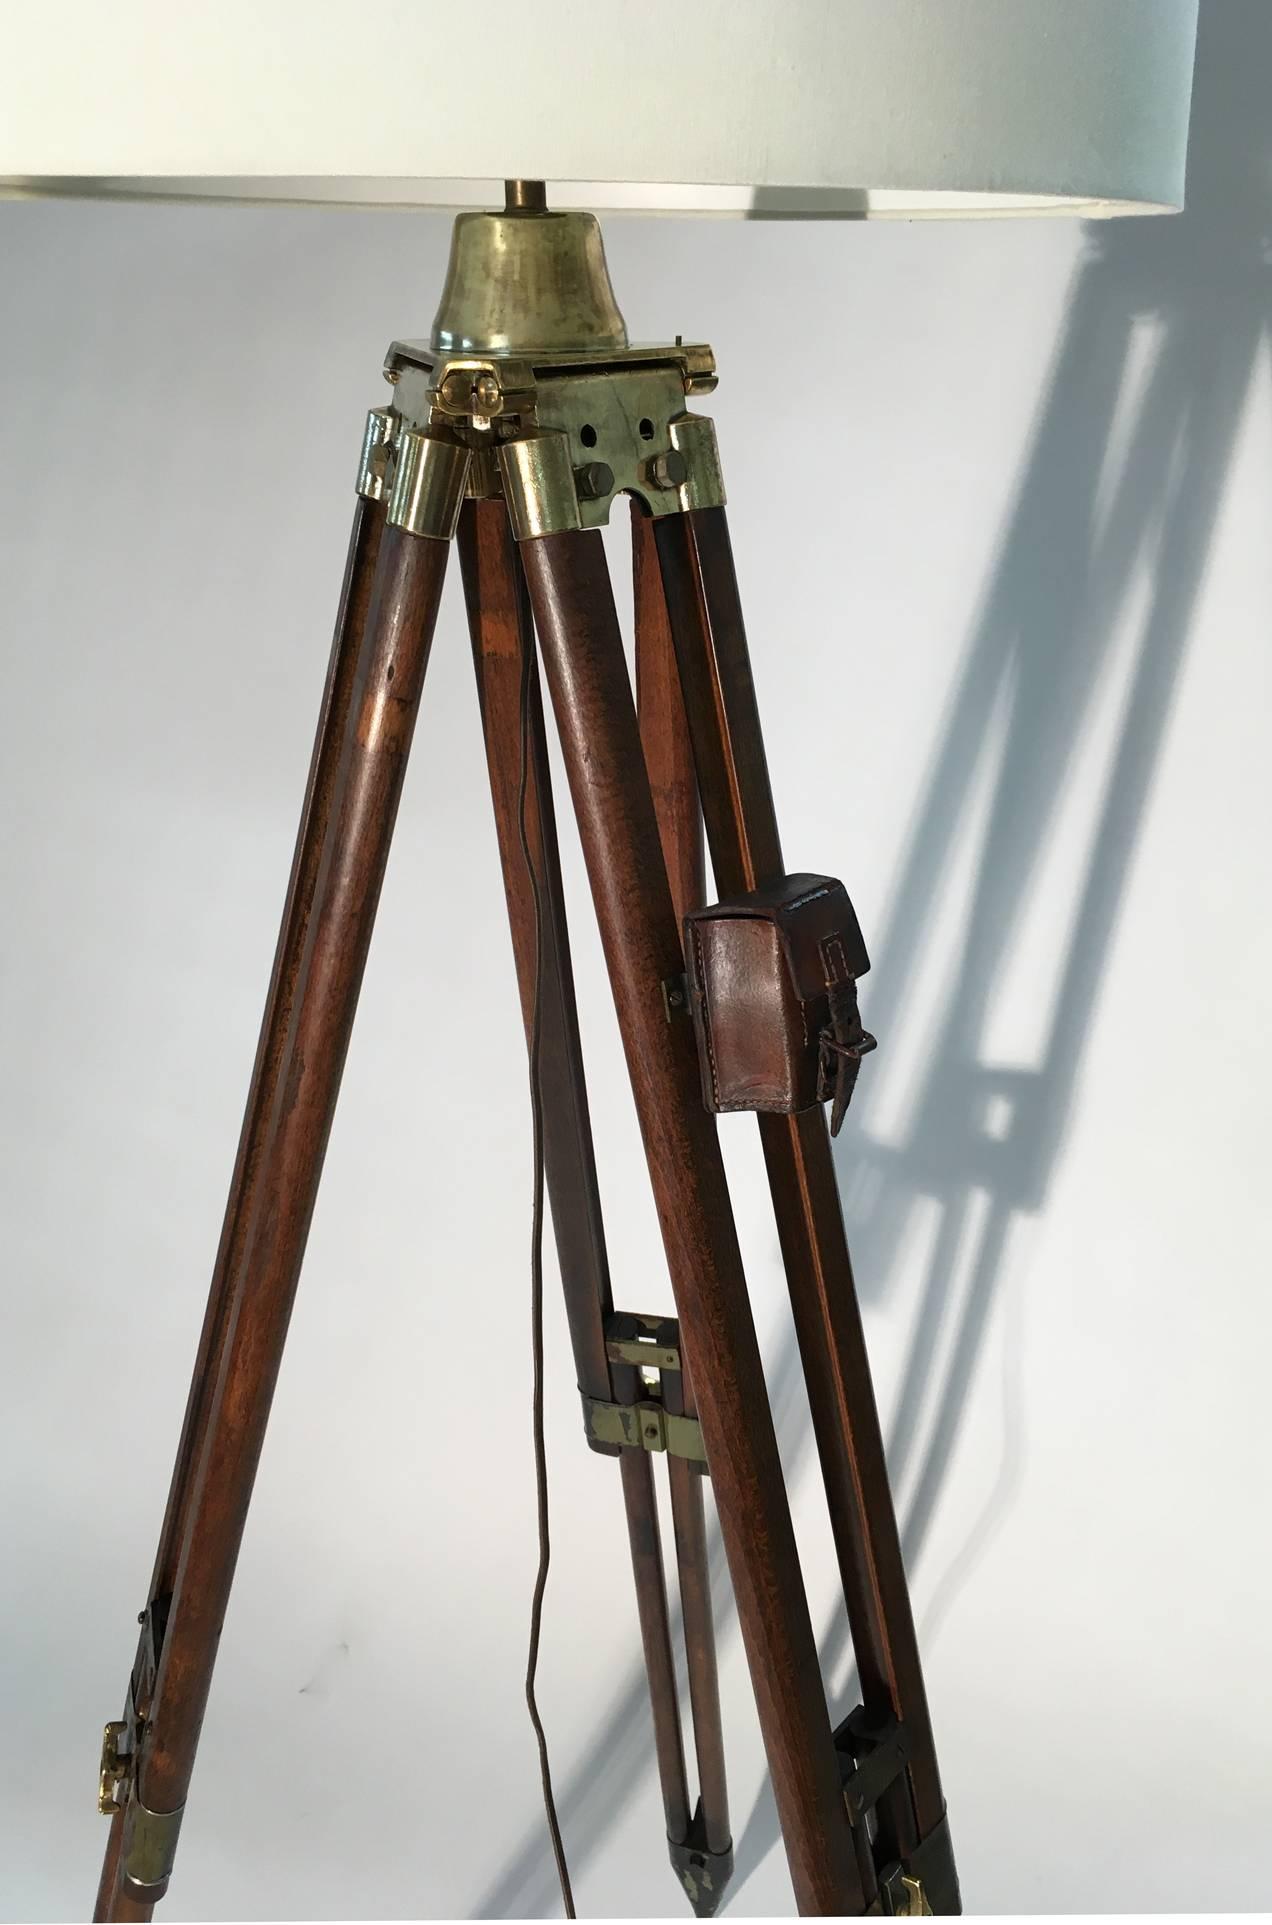 An adjustable floor lamp made from an antique Swiss surveyor tripod of wood and solid brass hardware. Features include brass adjustment wing nuts on patina metal clasps for height adjustment, a small leather box pouch. The tripod base is capped with